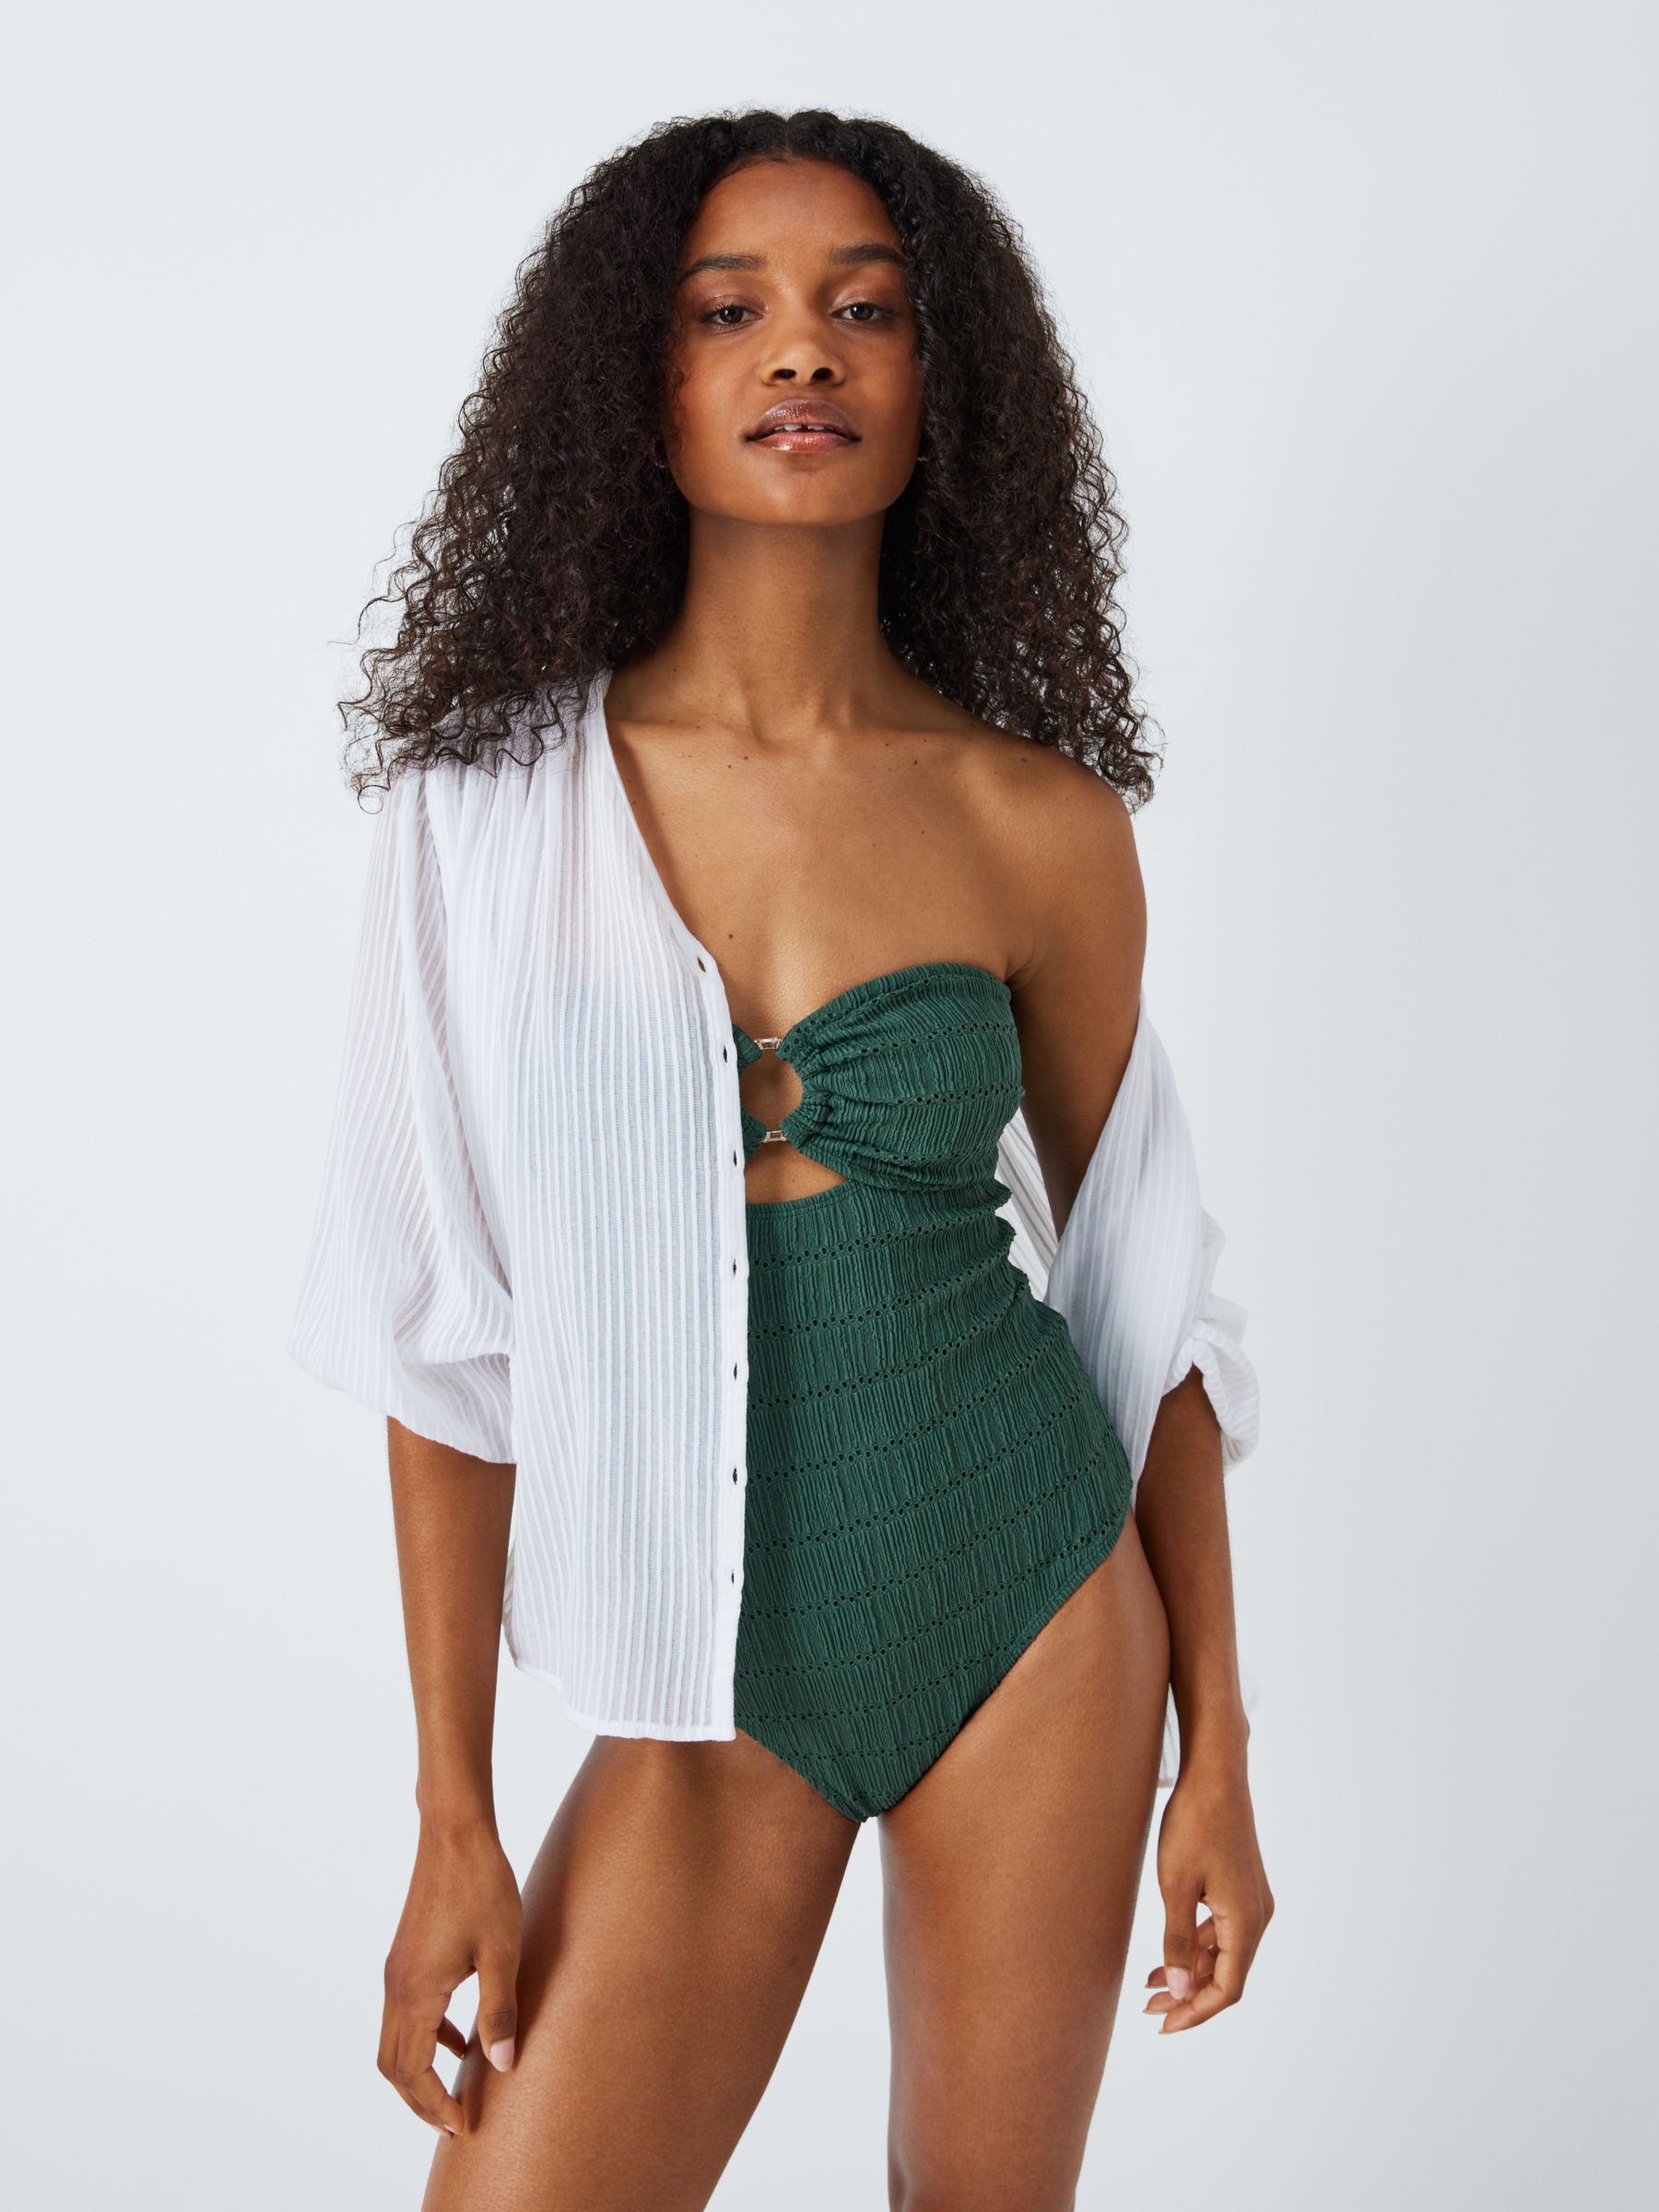 Buy AND/OR Bali Crochet Swimsuit, Green Online at johnlewis.com